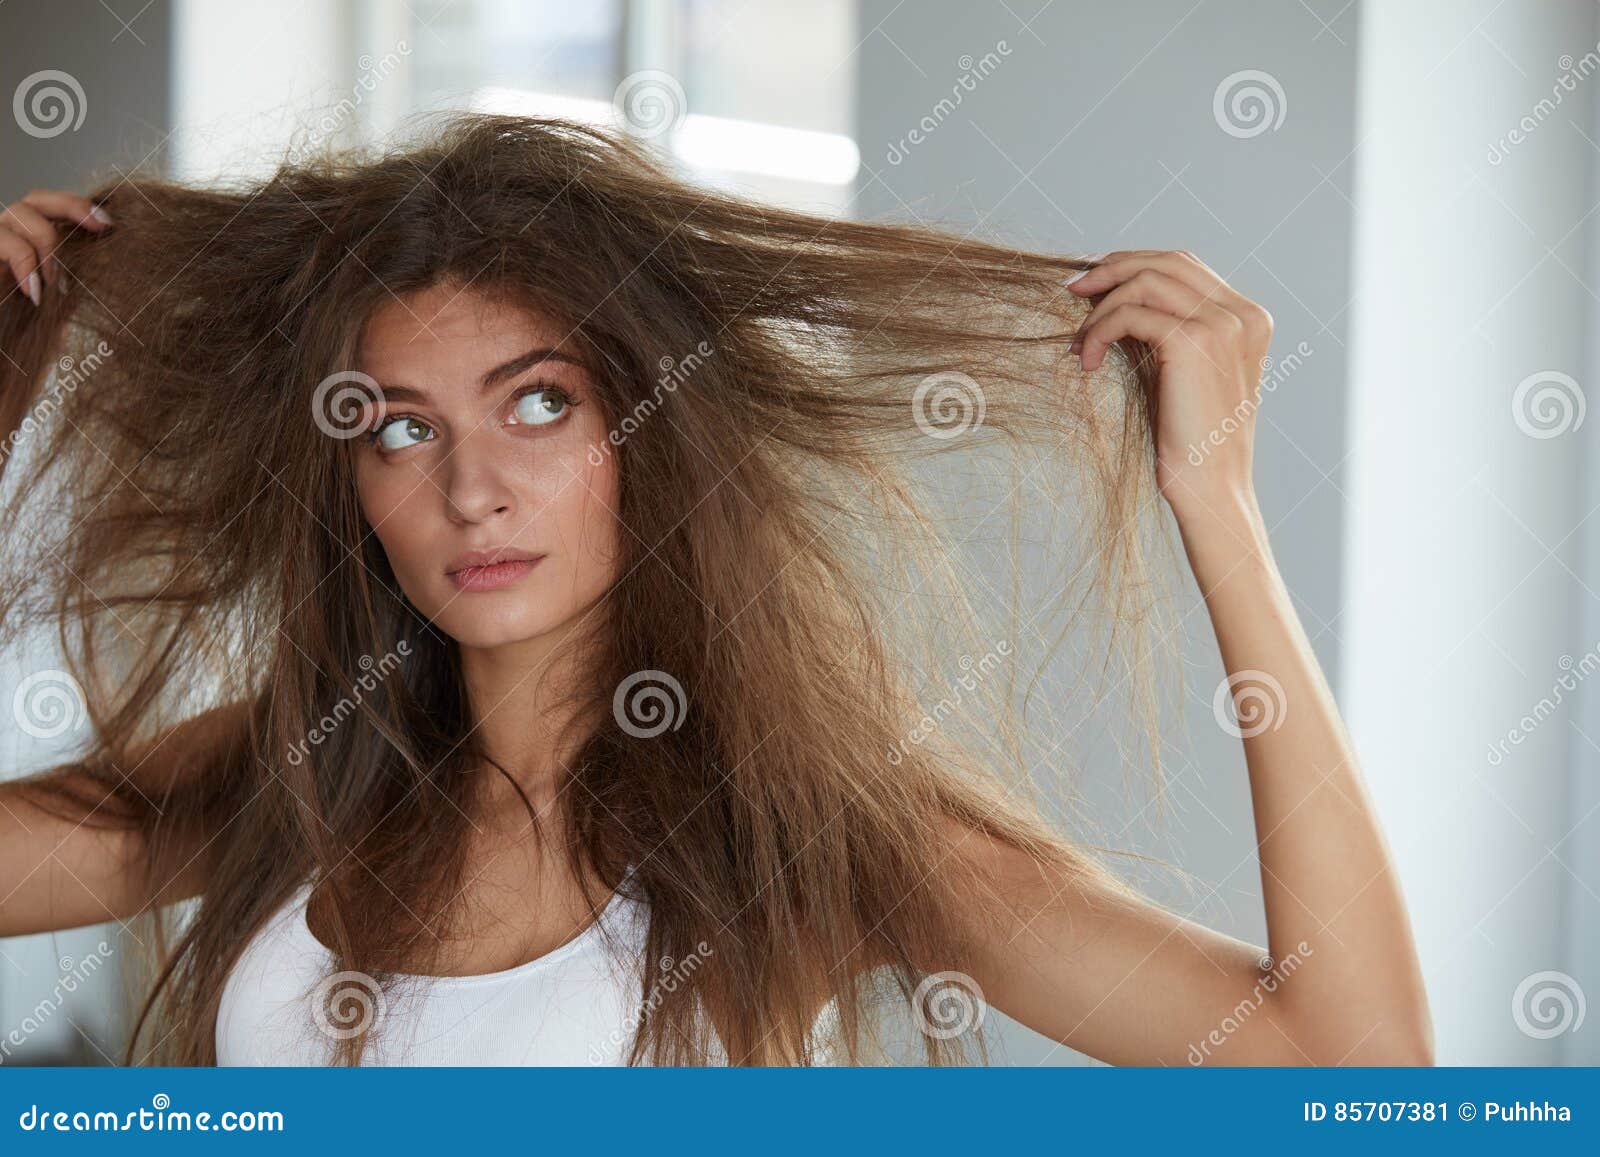 woman with holding long damaged dry hair. hair damage, haircare.